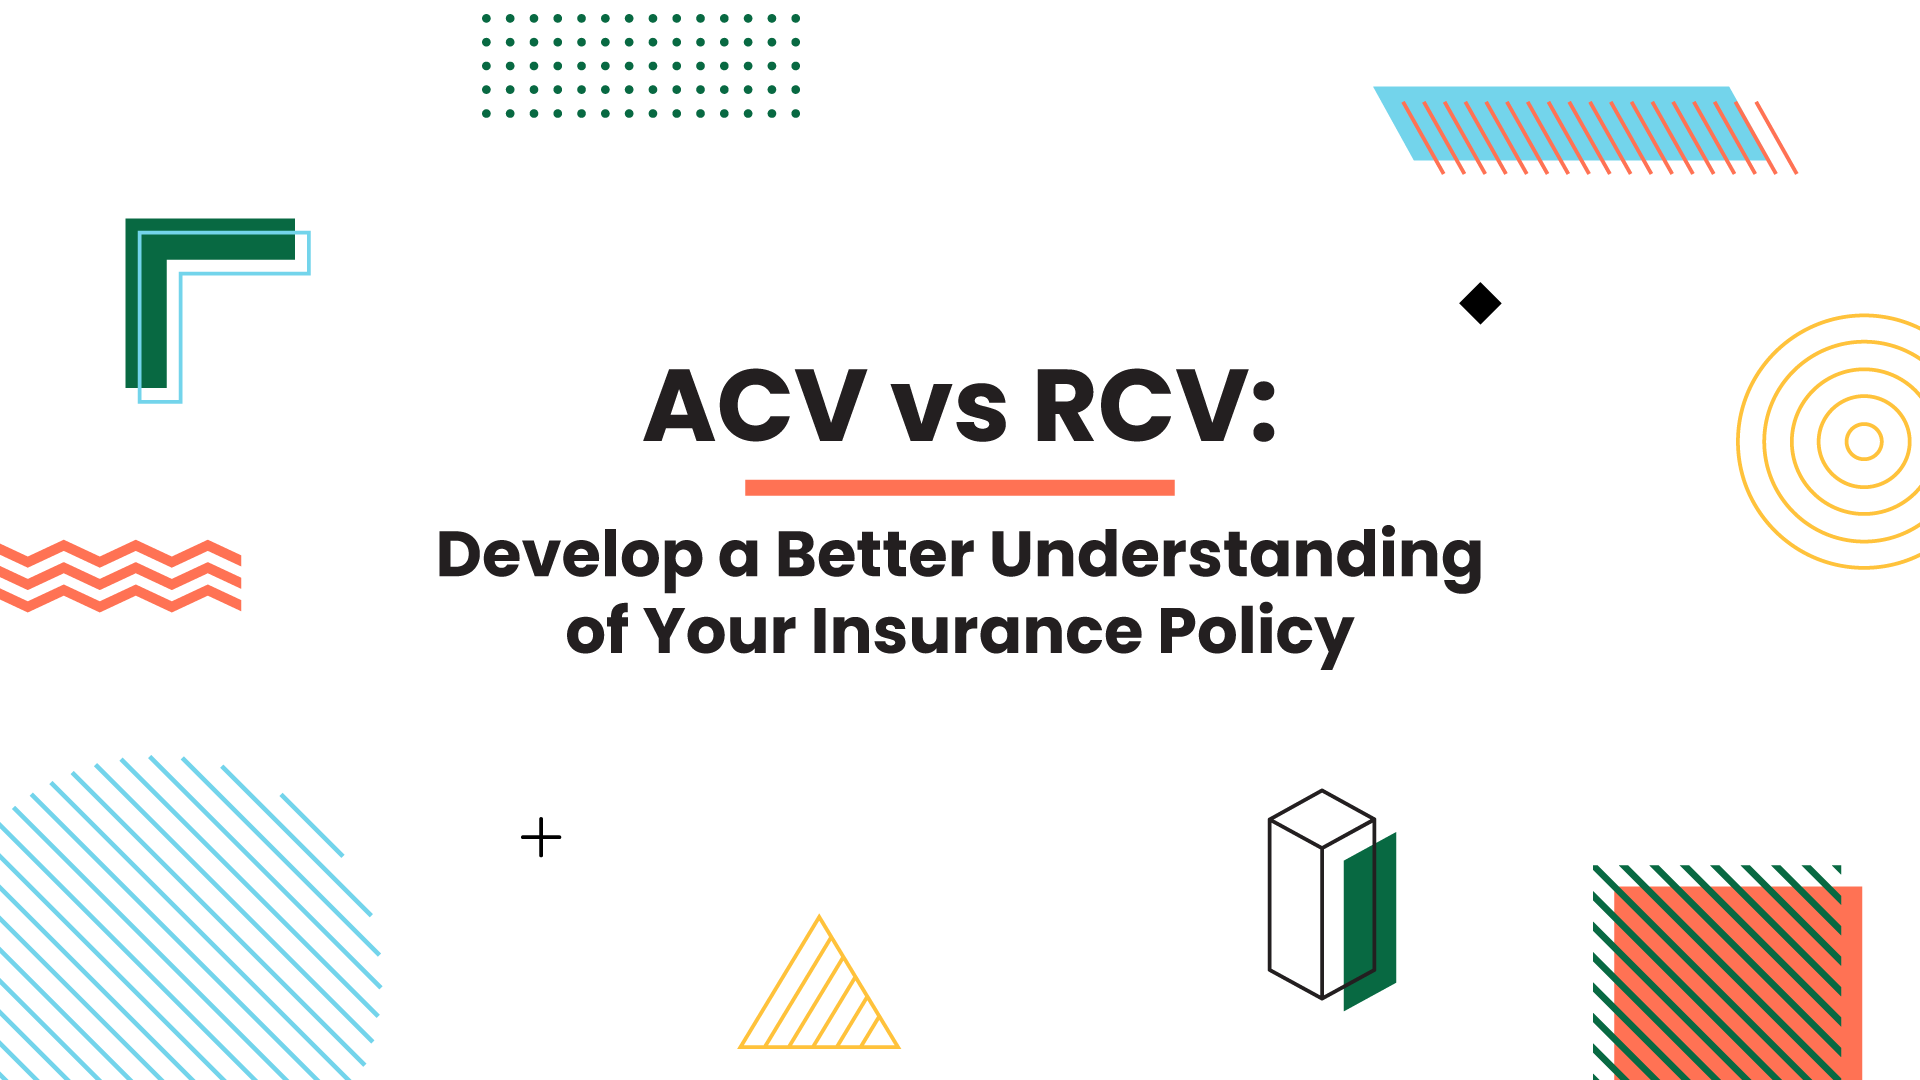 Actual Cash Value vs. Replacement Cost Value: Develop a Better Understanding of Your Insurance Policy